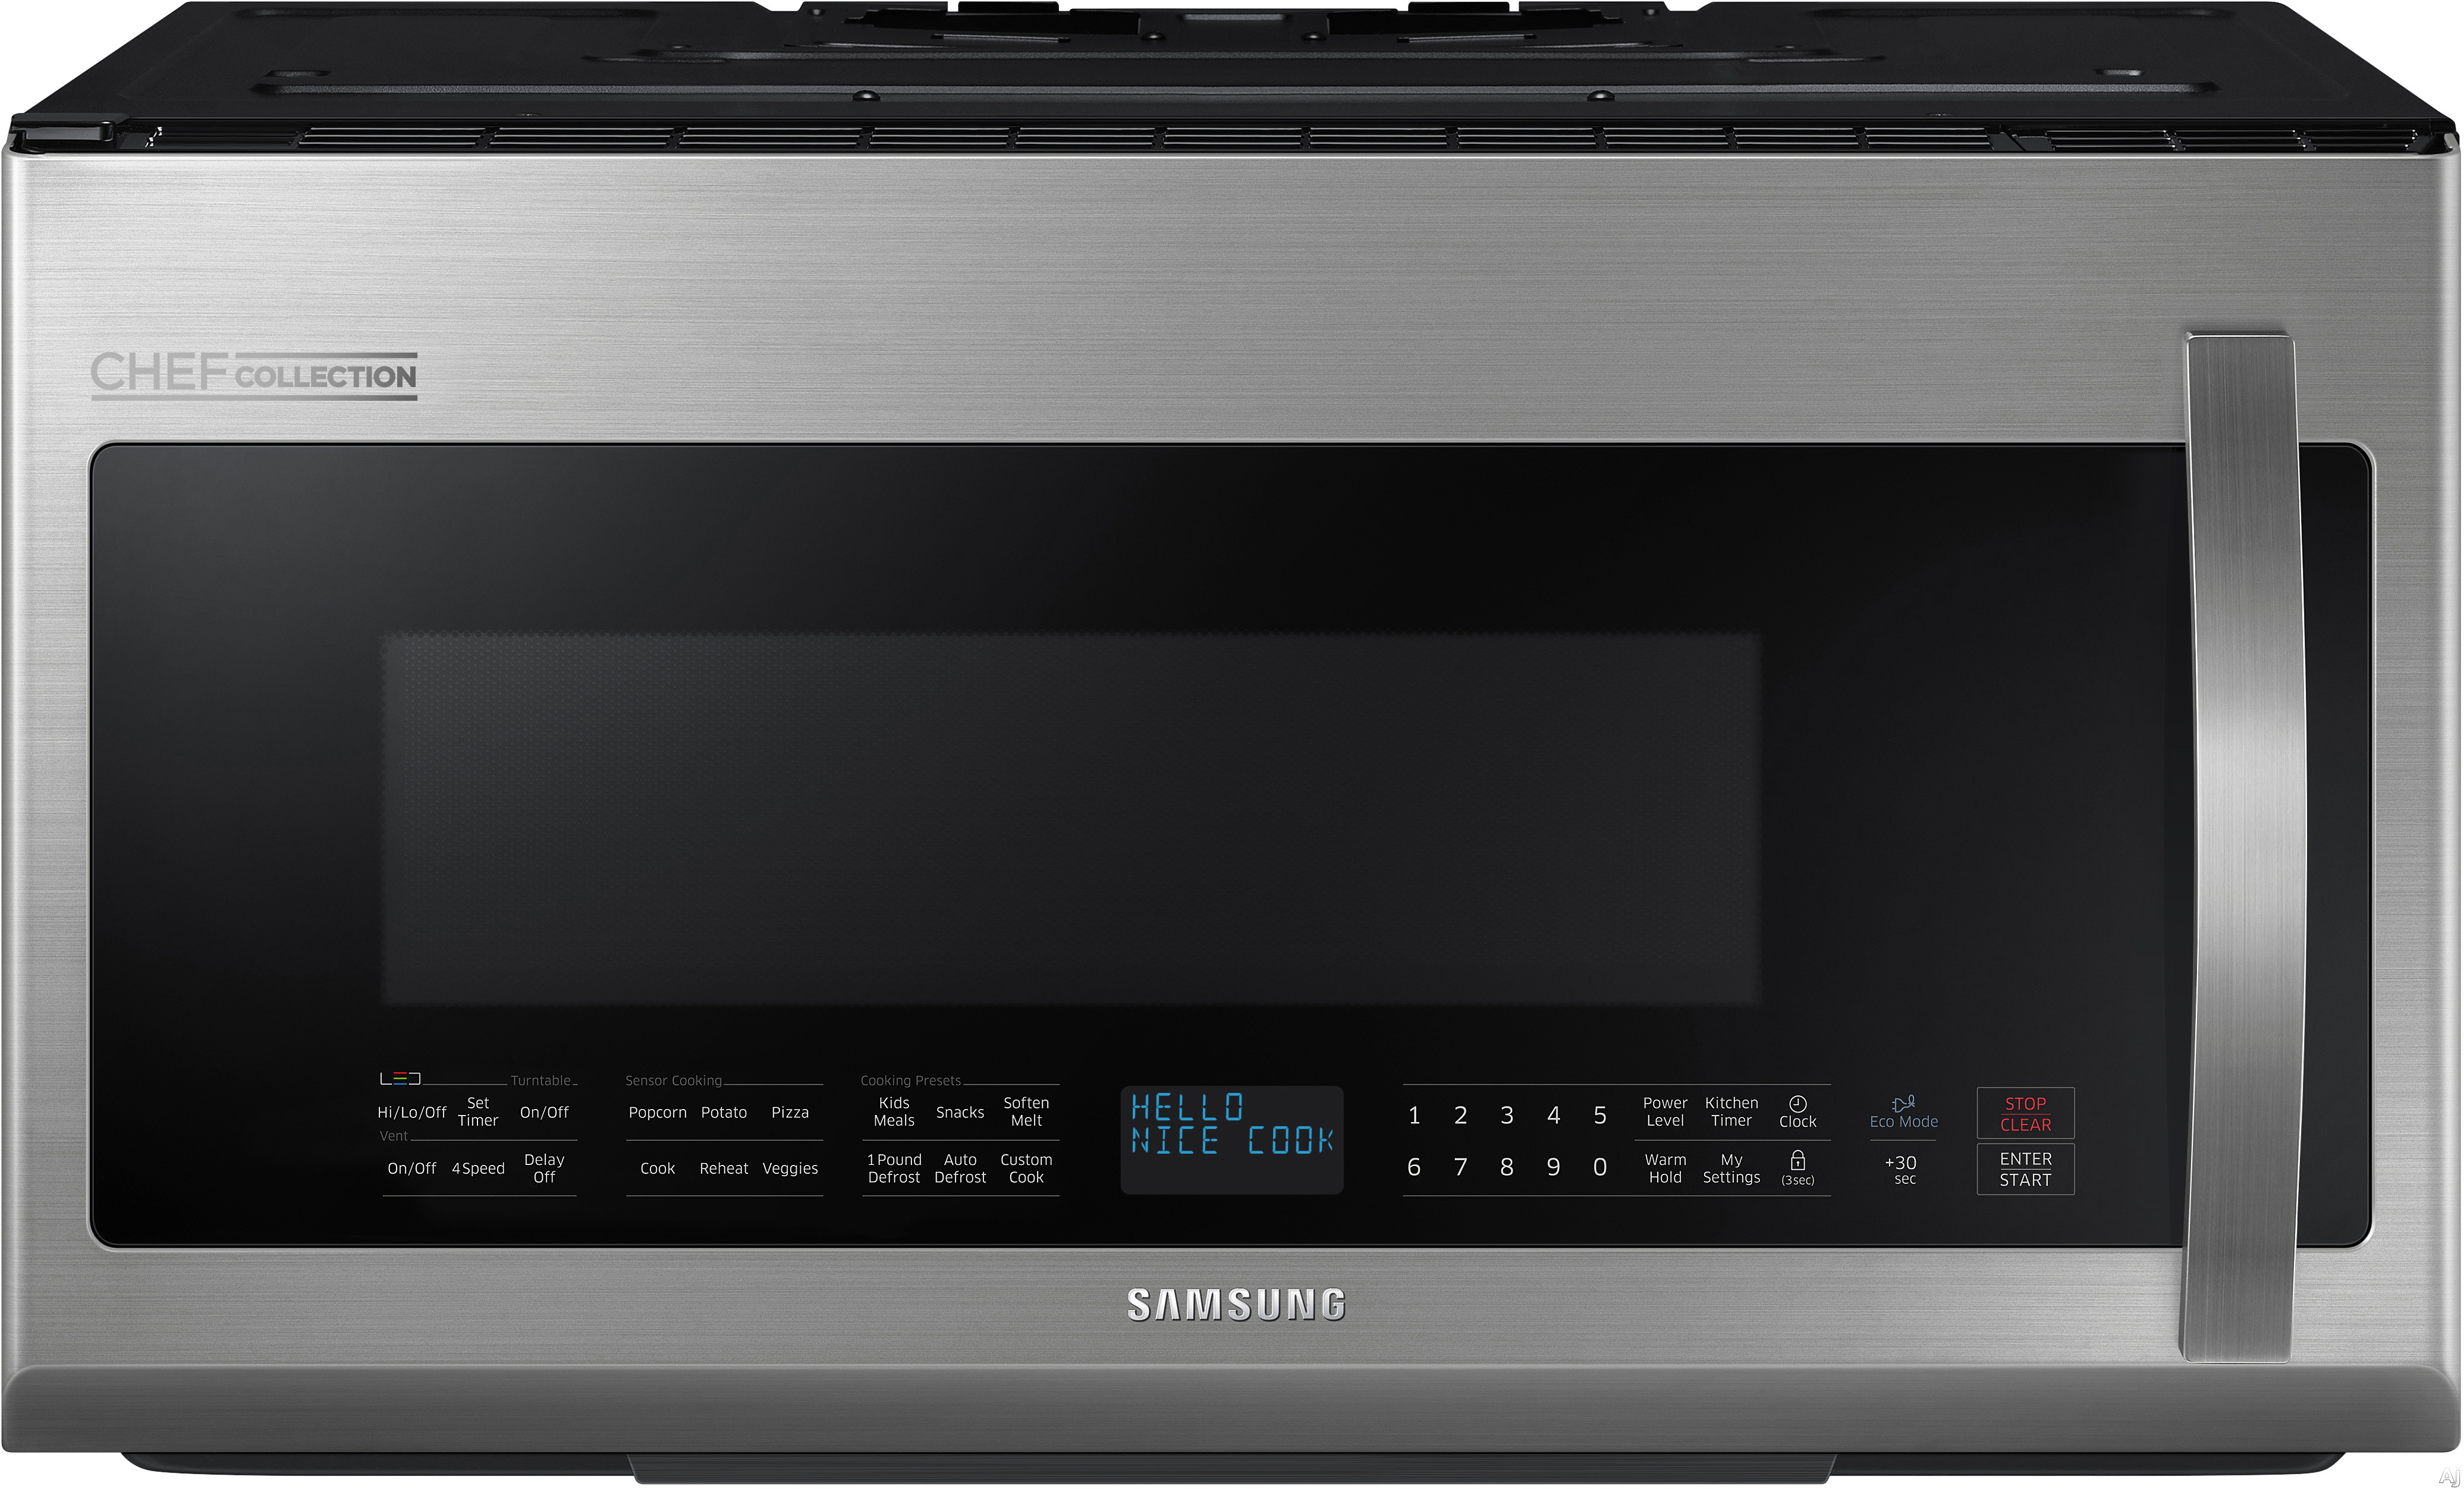 Samsung ME21H9900AS 2.1 cu. ft. Over-the-Range Microwave Oven with 1000